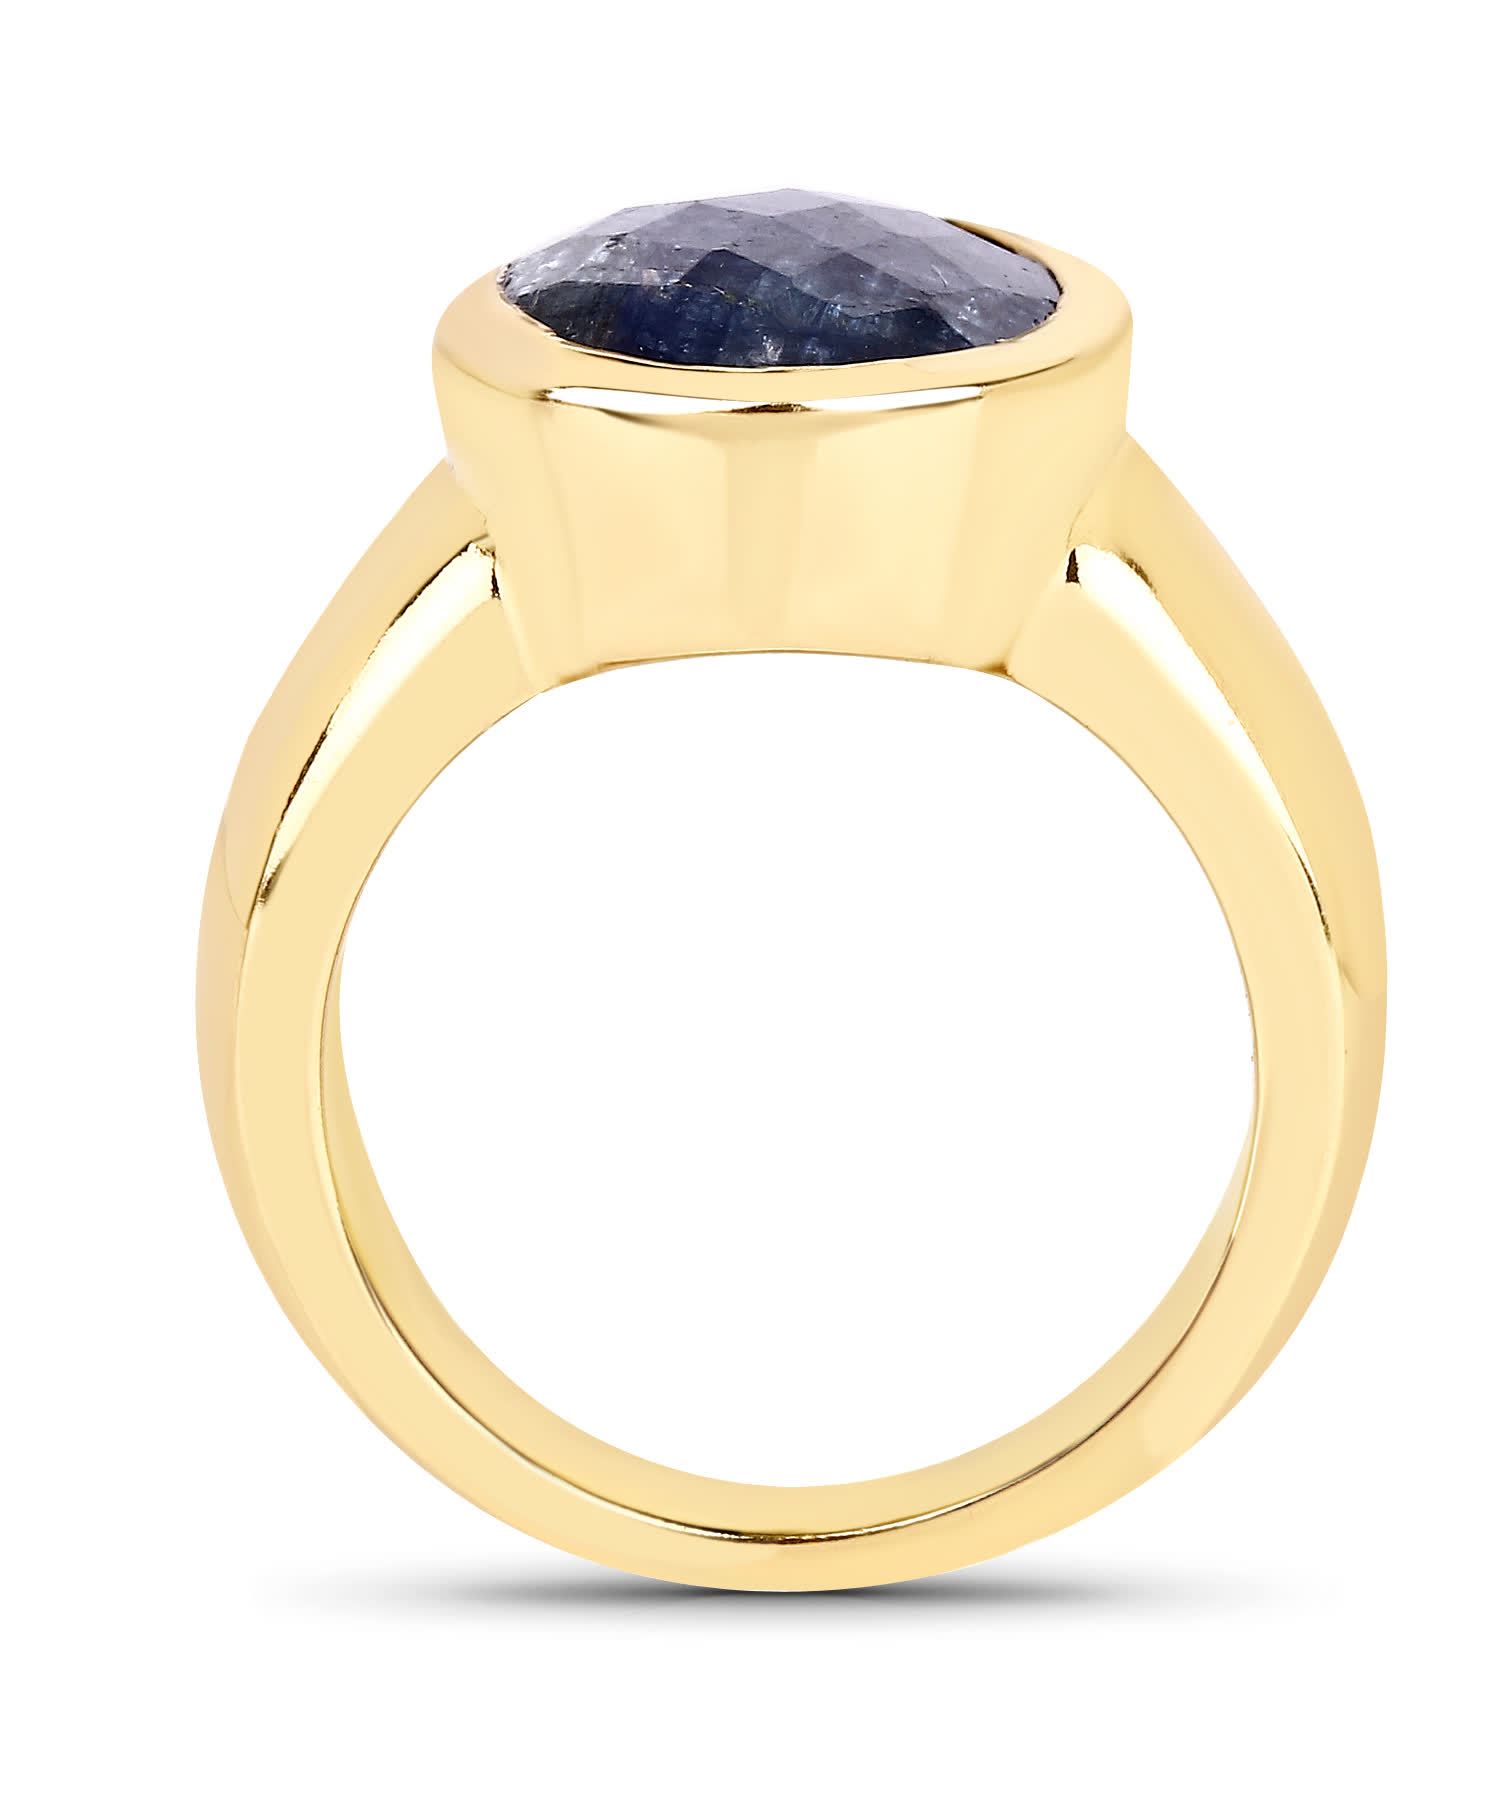 5.25ctw Natural Midnight Blue Sapphire 14k Gold Plated Ring View 2